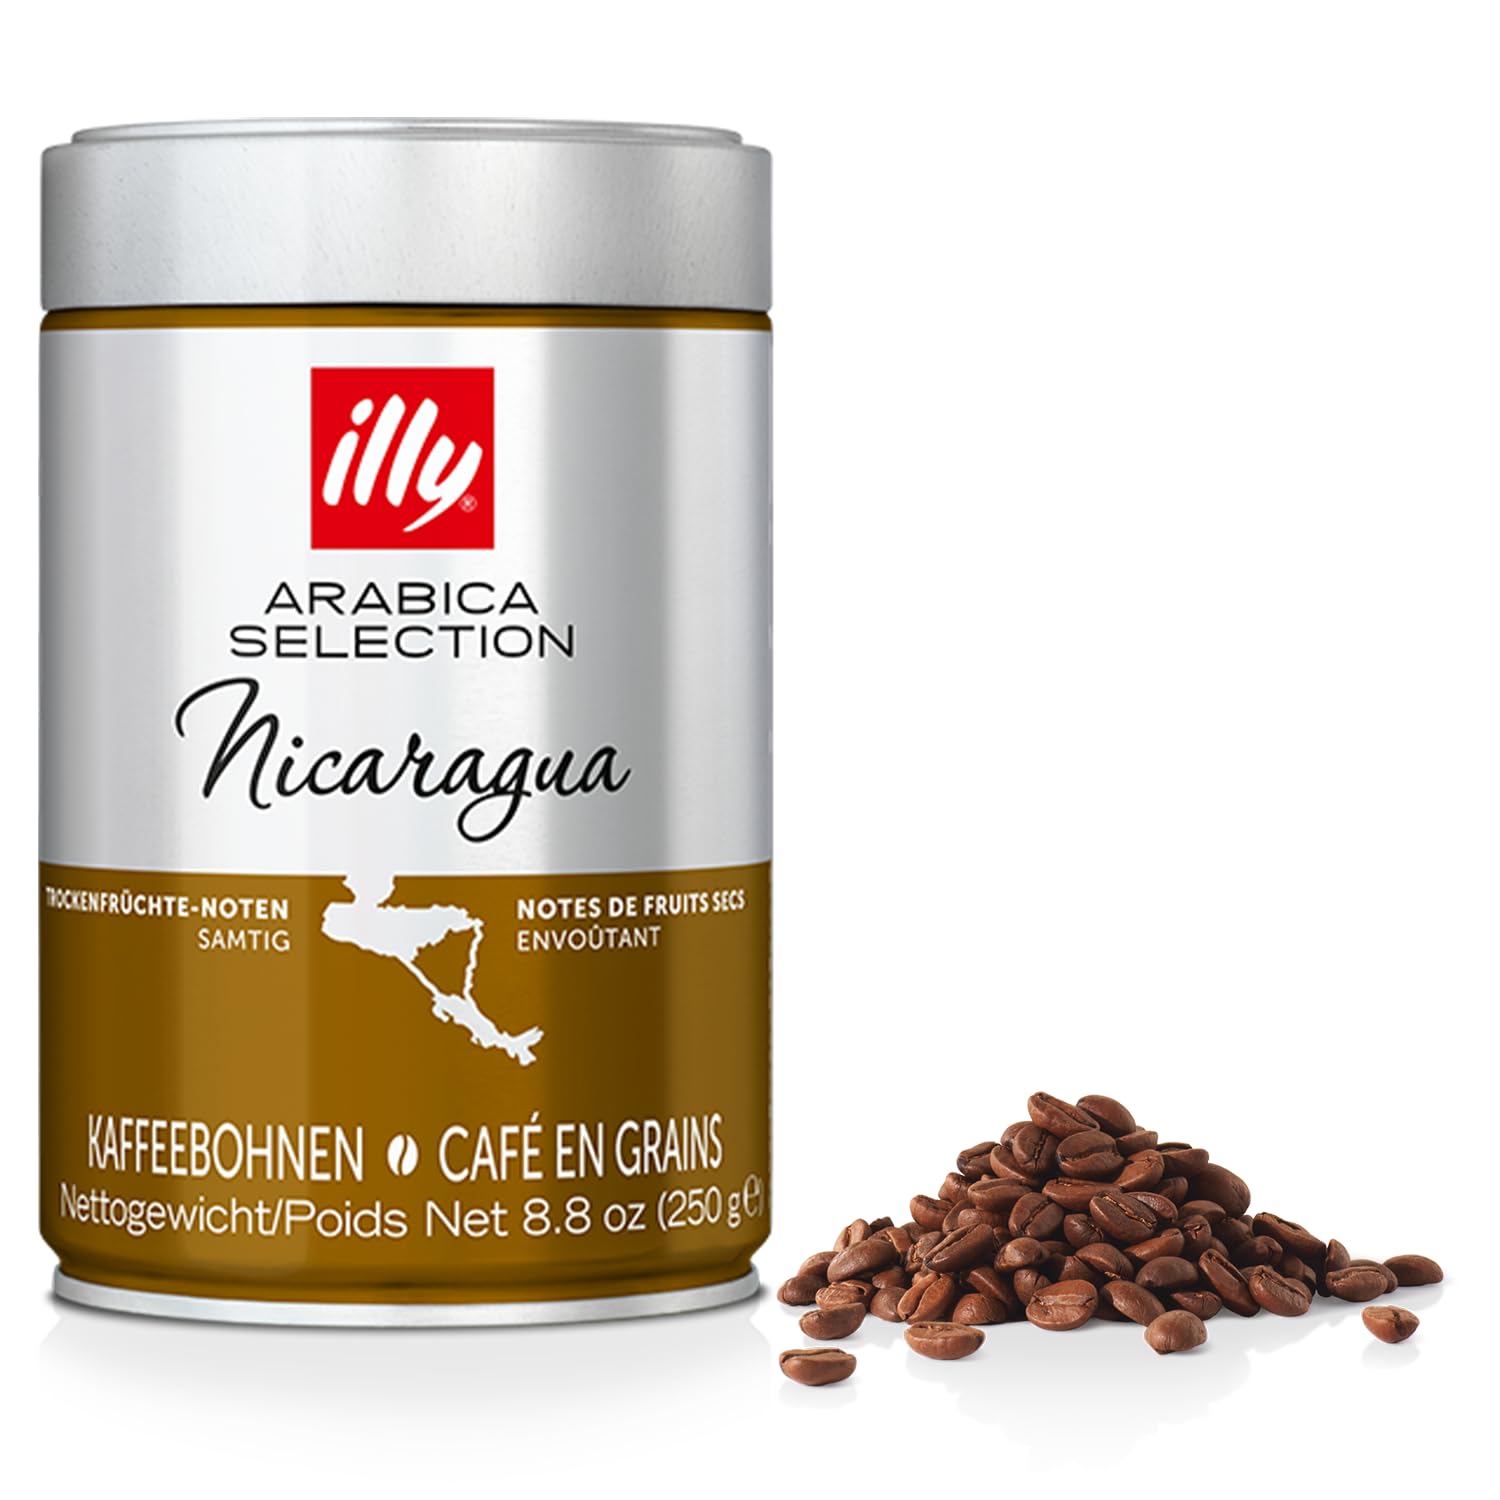 illy Arabica Selections Nicaragua Whole Bean Coffee, 100% Arabica Bean Single Origin Coffee, No Preservatives, 8.8oz (Pack of 1)